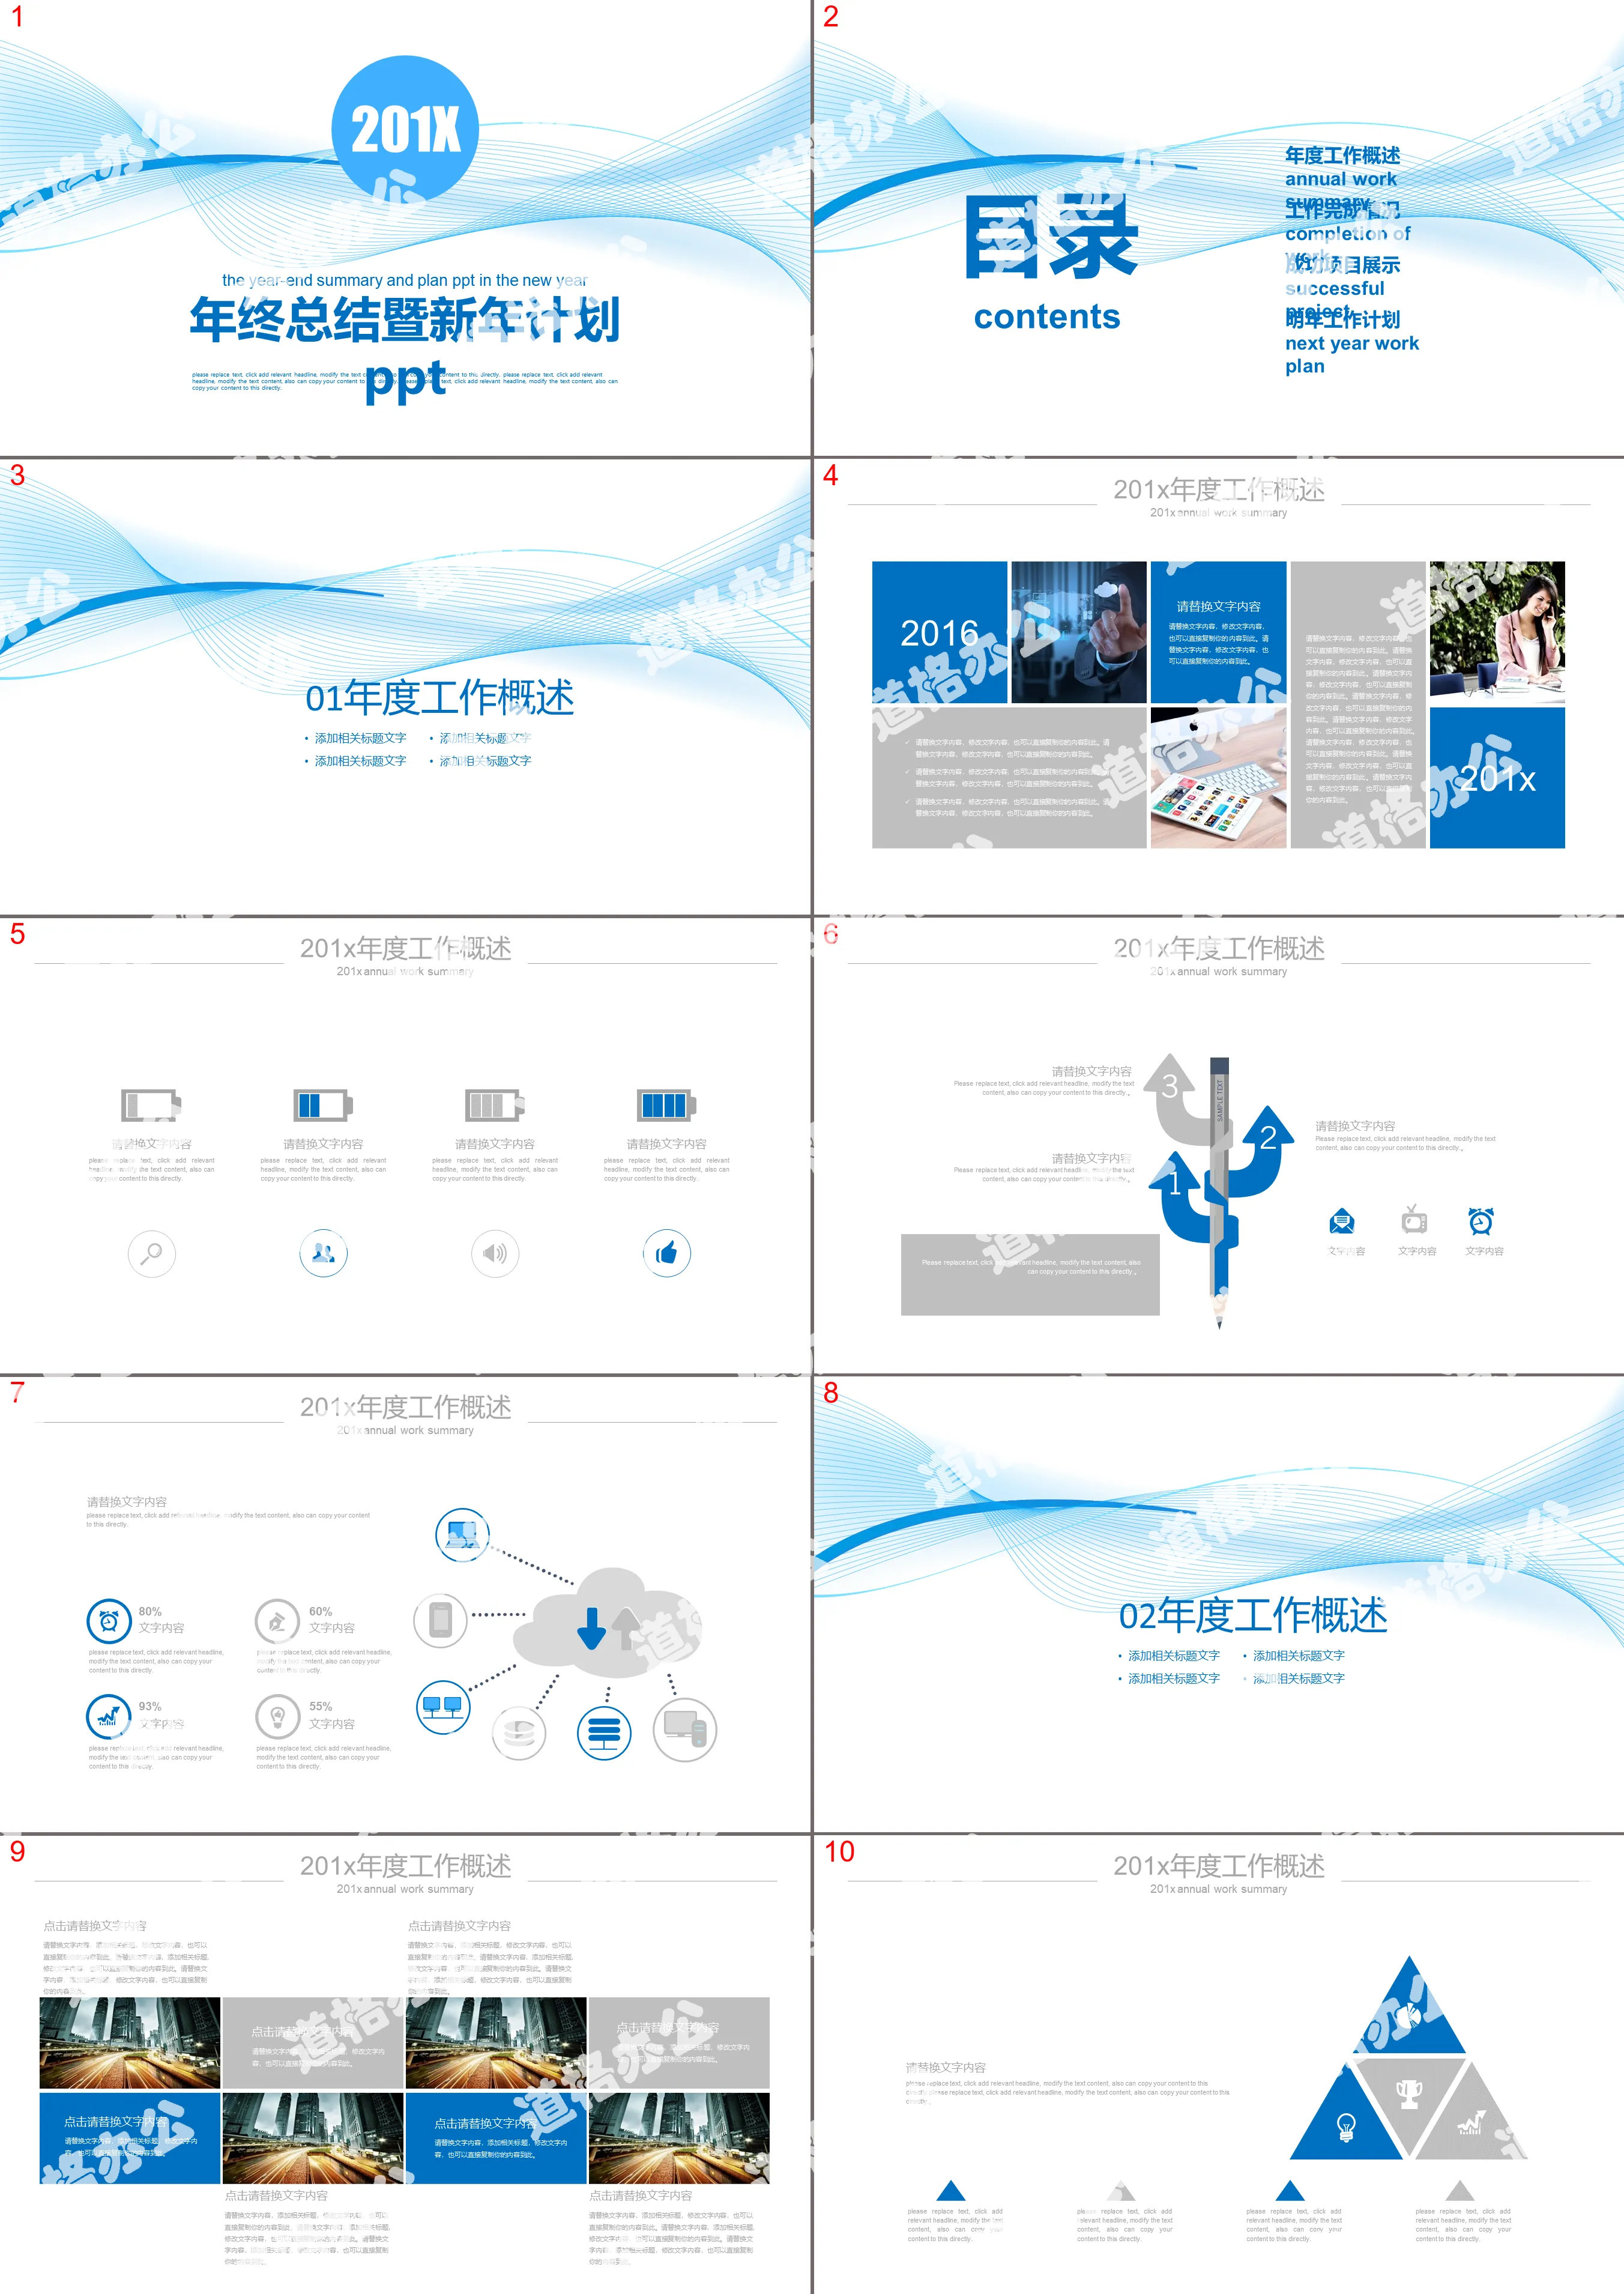 Blue space curve background work summary plan PPT template